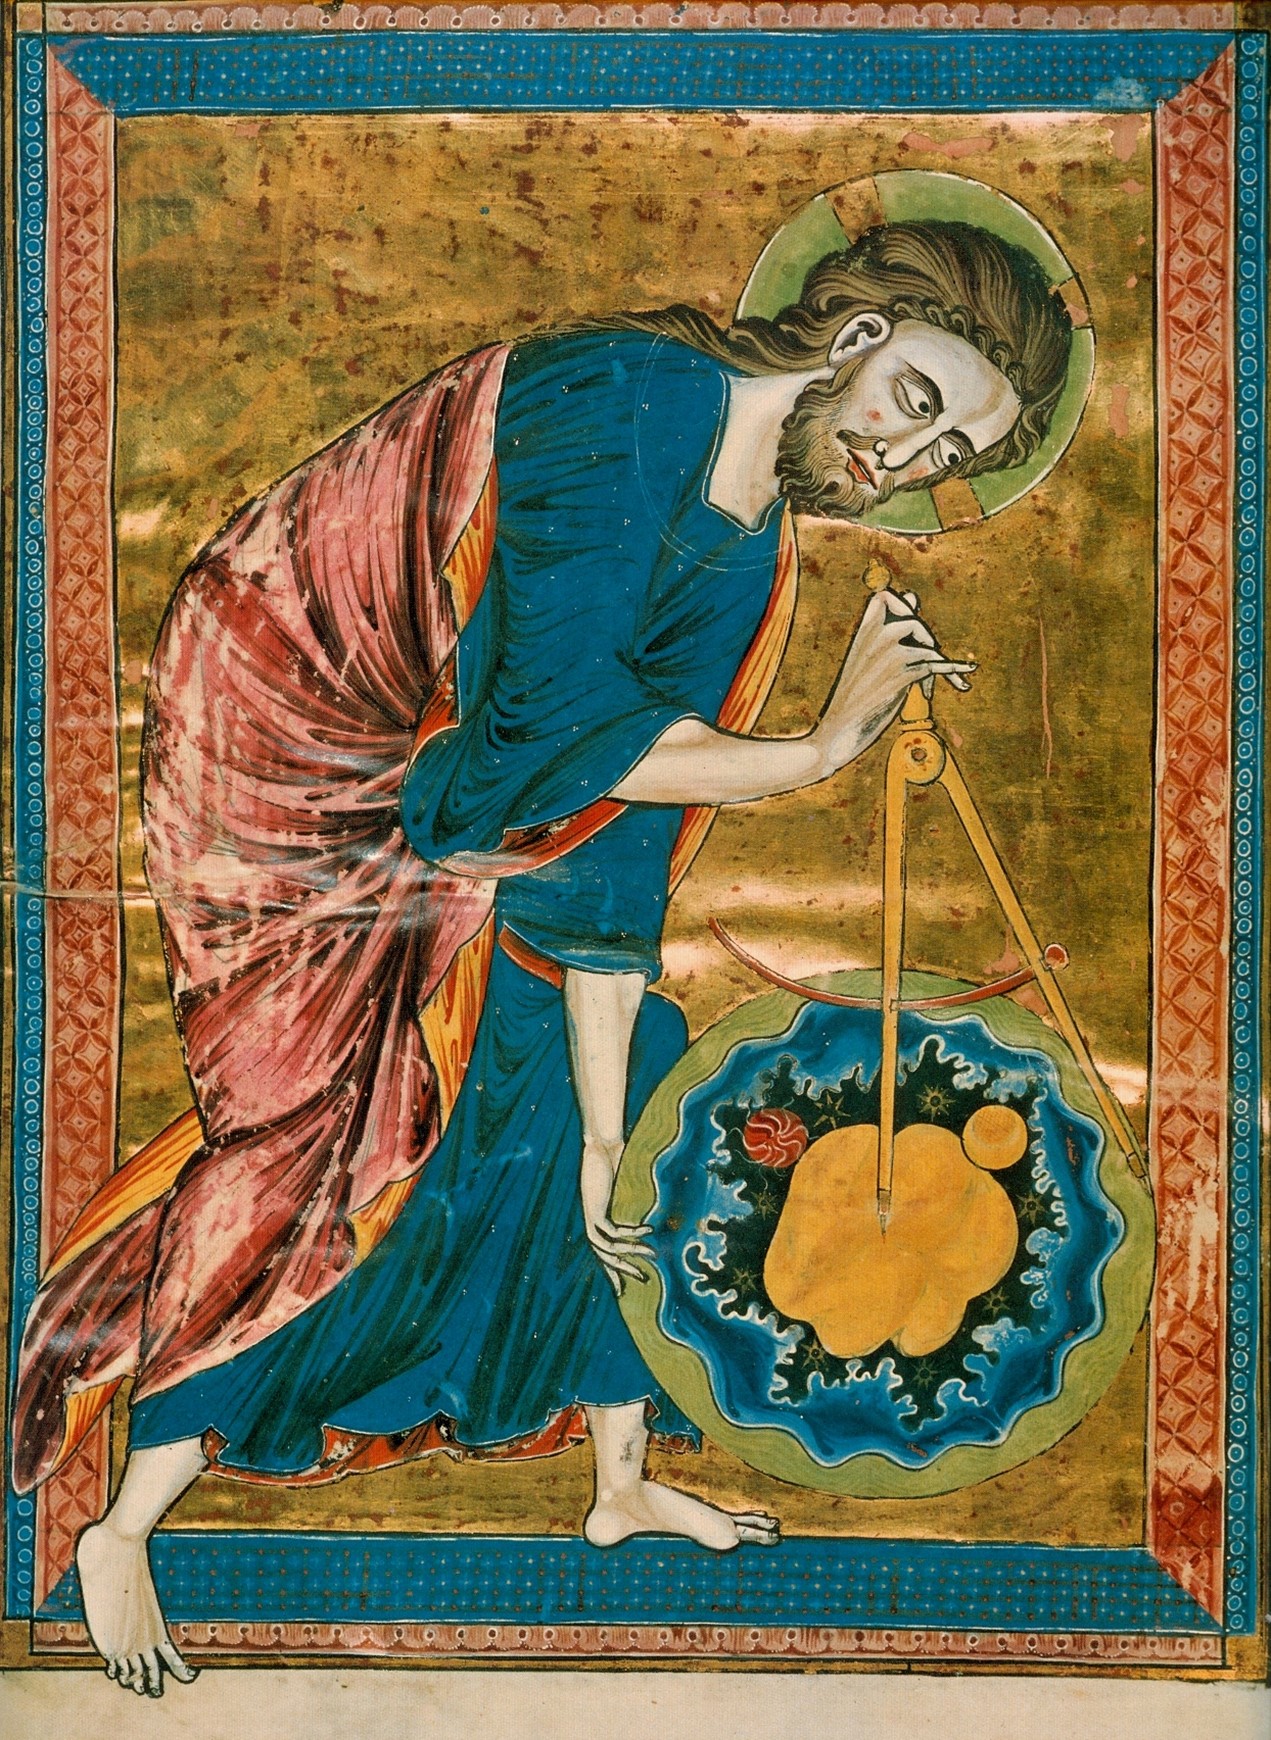 Illustration from a French copies of the Bible